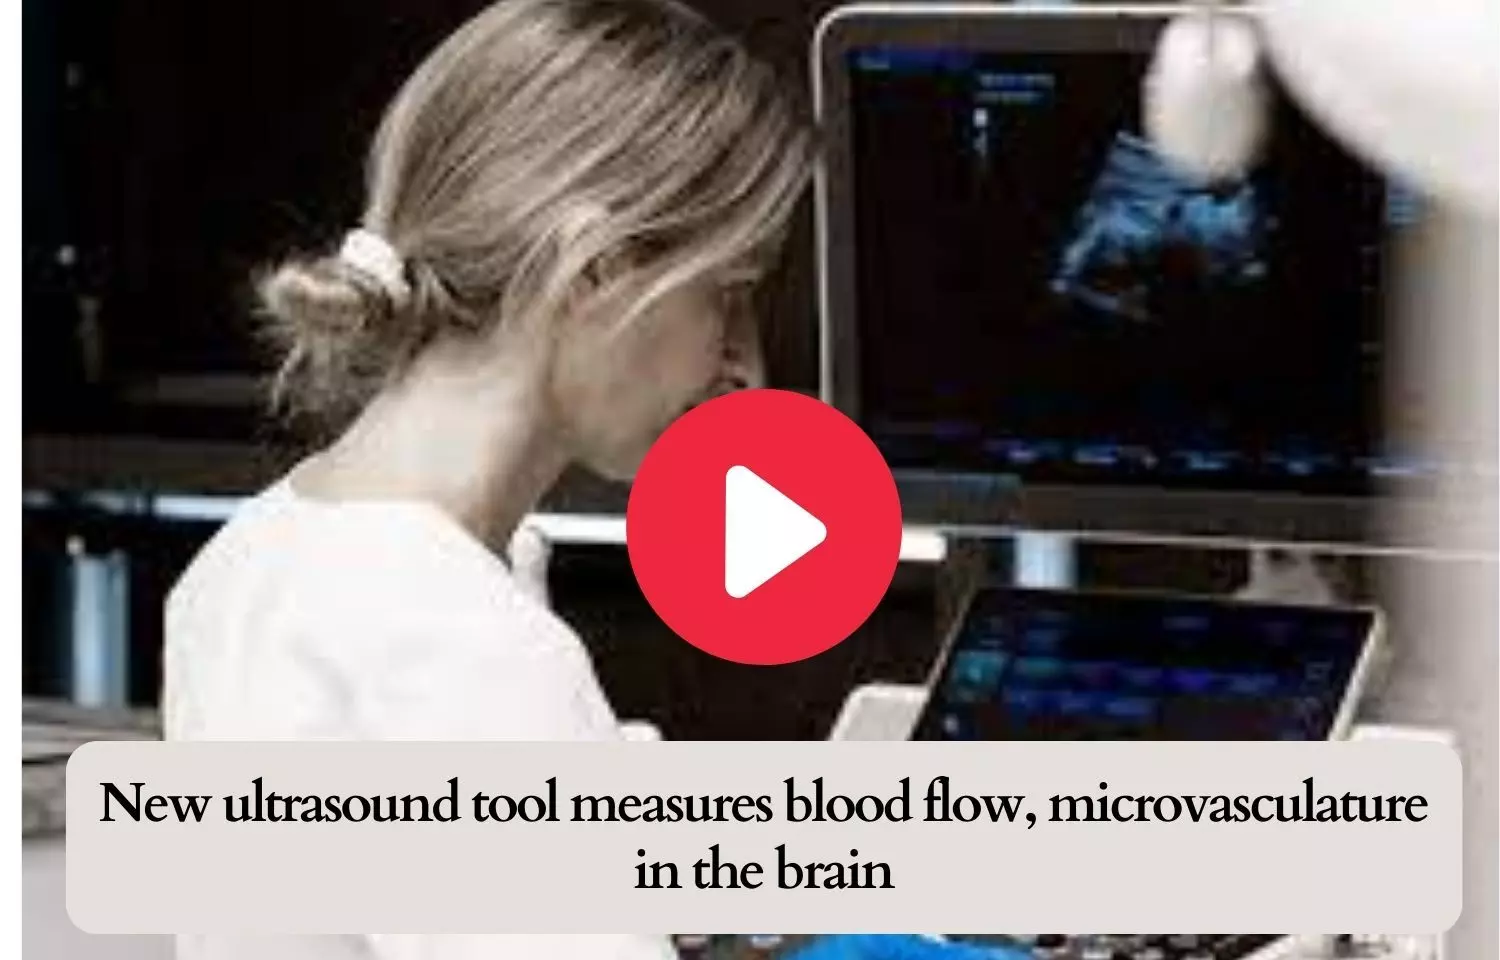 New ultrasound tool measures blood flow, microvasculature in the brain